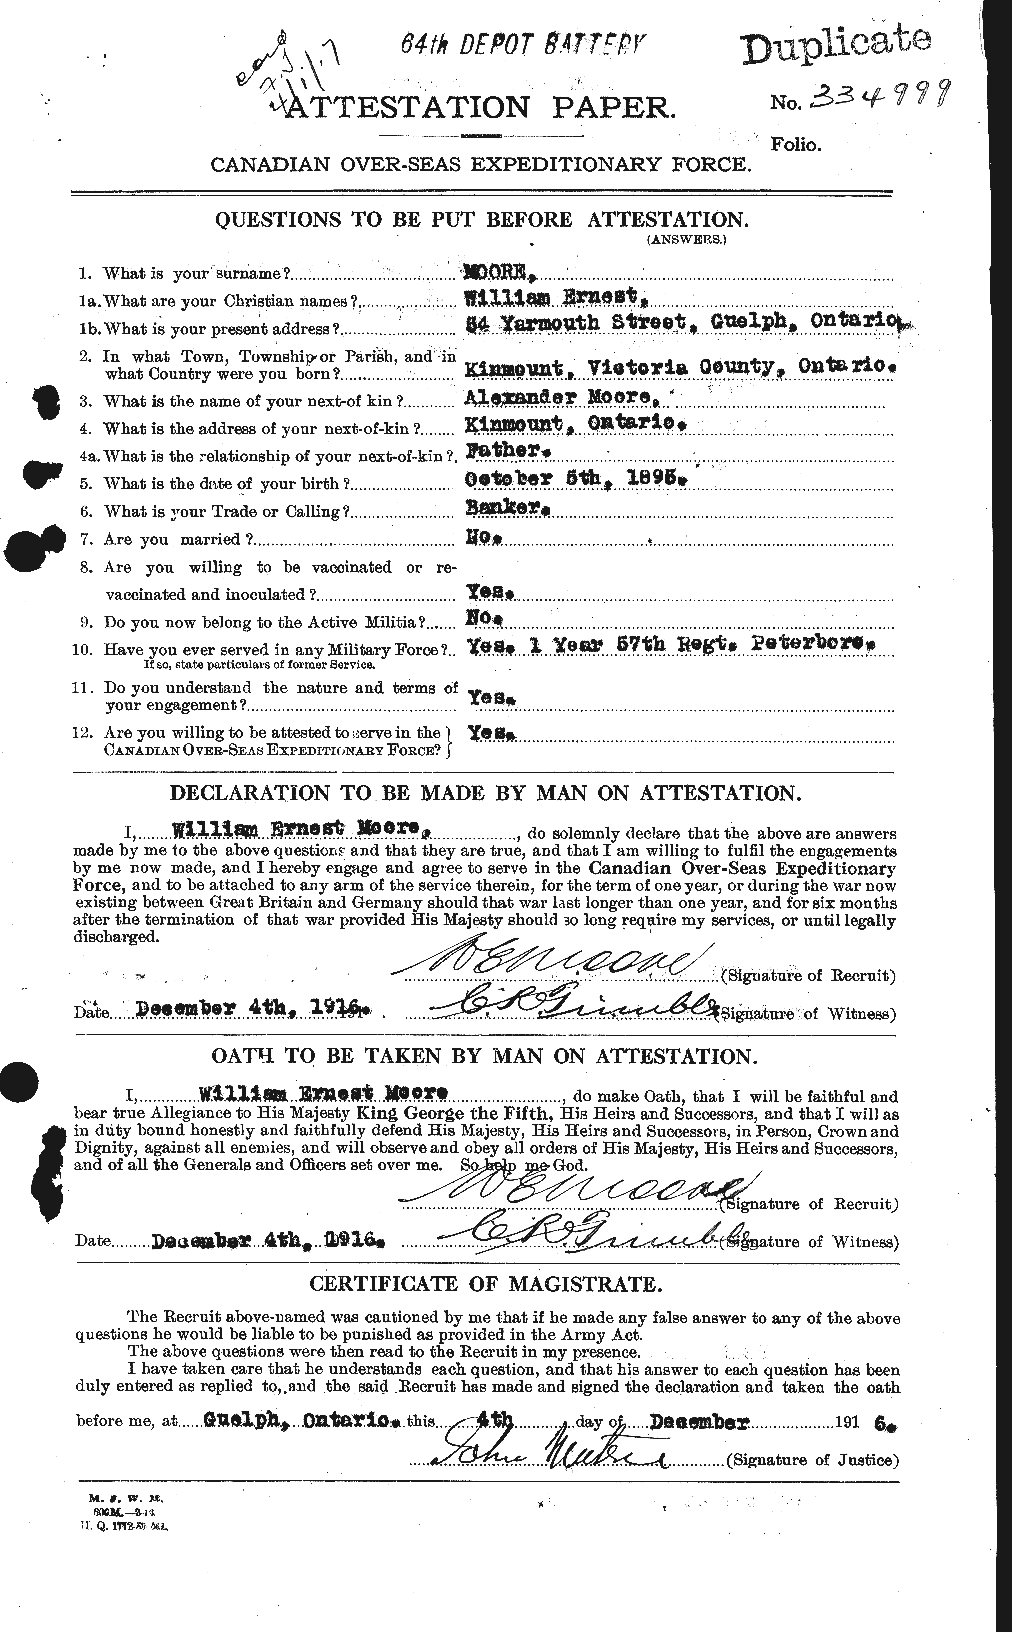 Personnel Records of the First World War - CEF 505796a